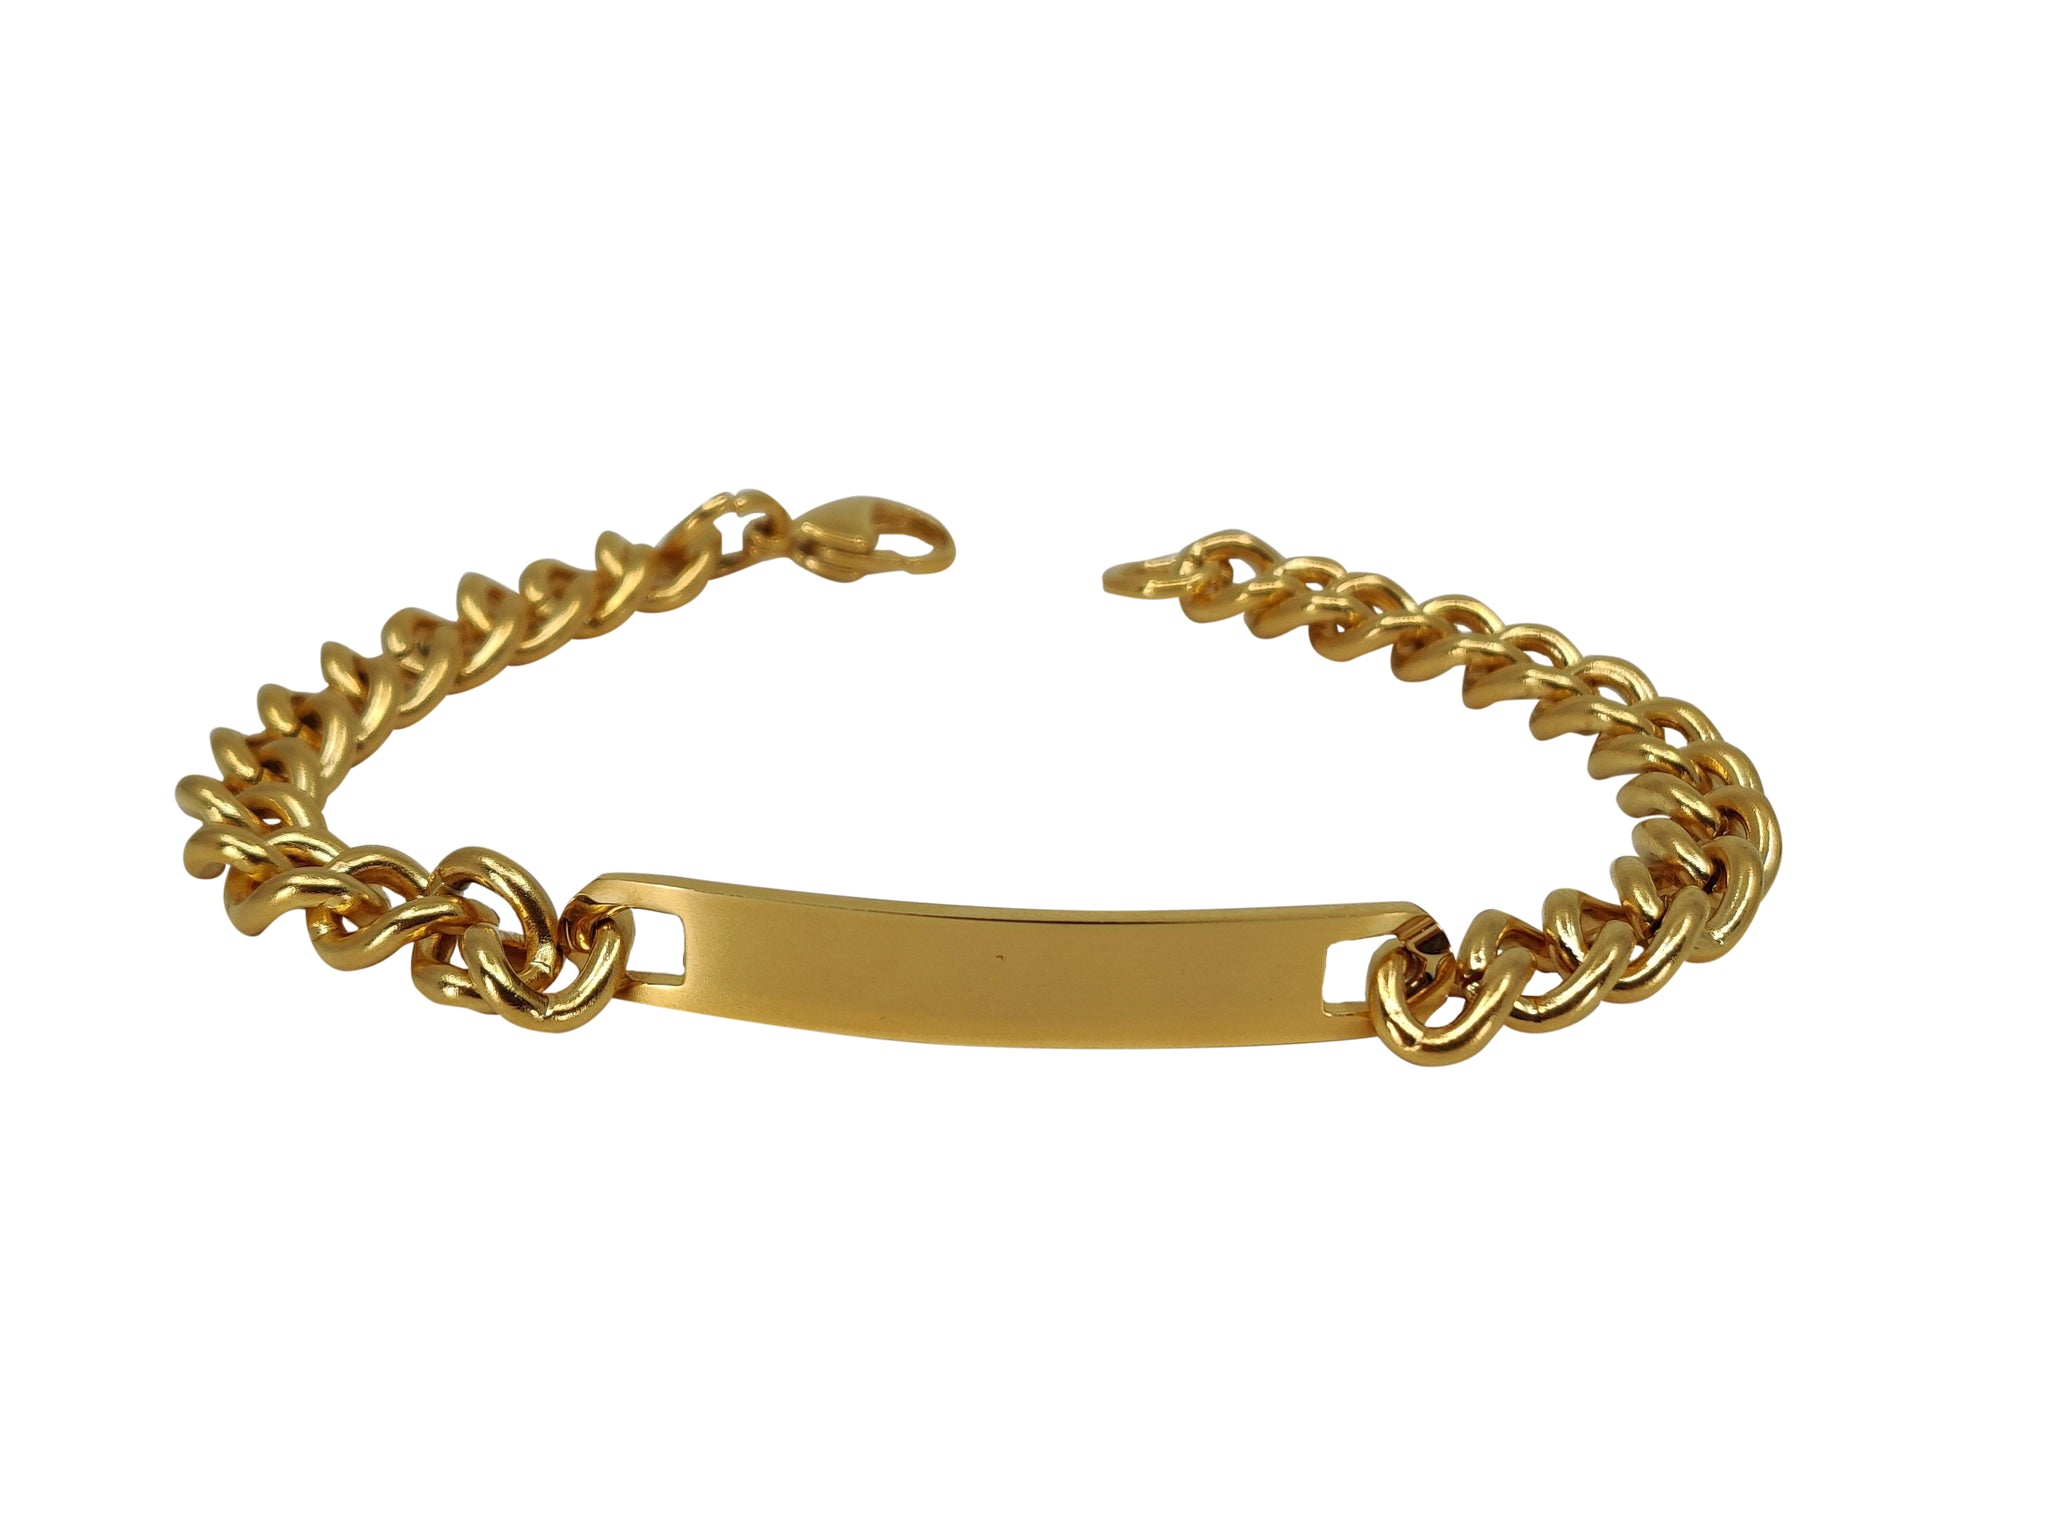 Flower France Pakistani Gold Bangles For Girls Small Gold Color Bracelet,  Perfect Baby Wear And Gift With Blessing From Xvwed, $26.87 | DHgate.Com